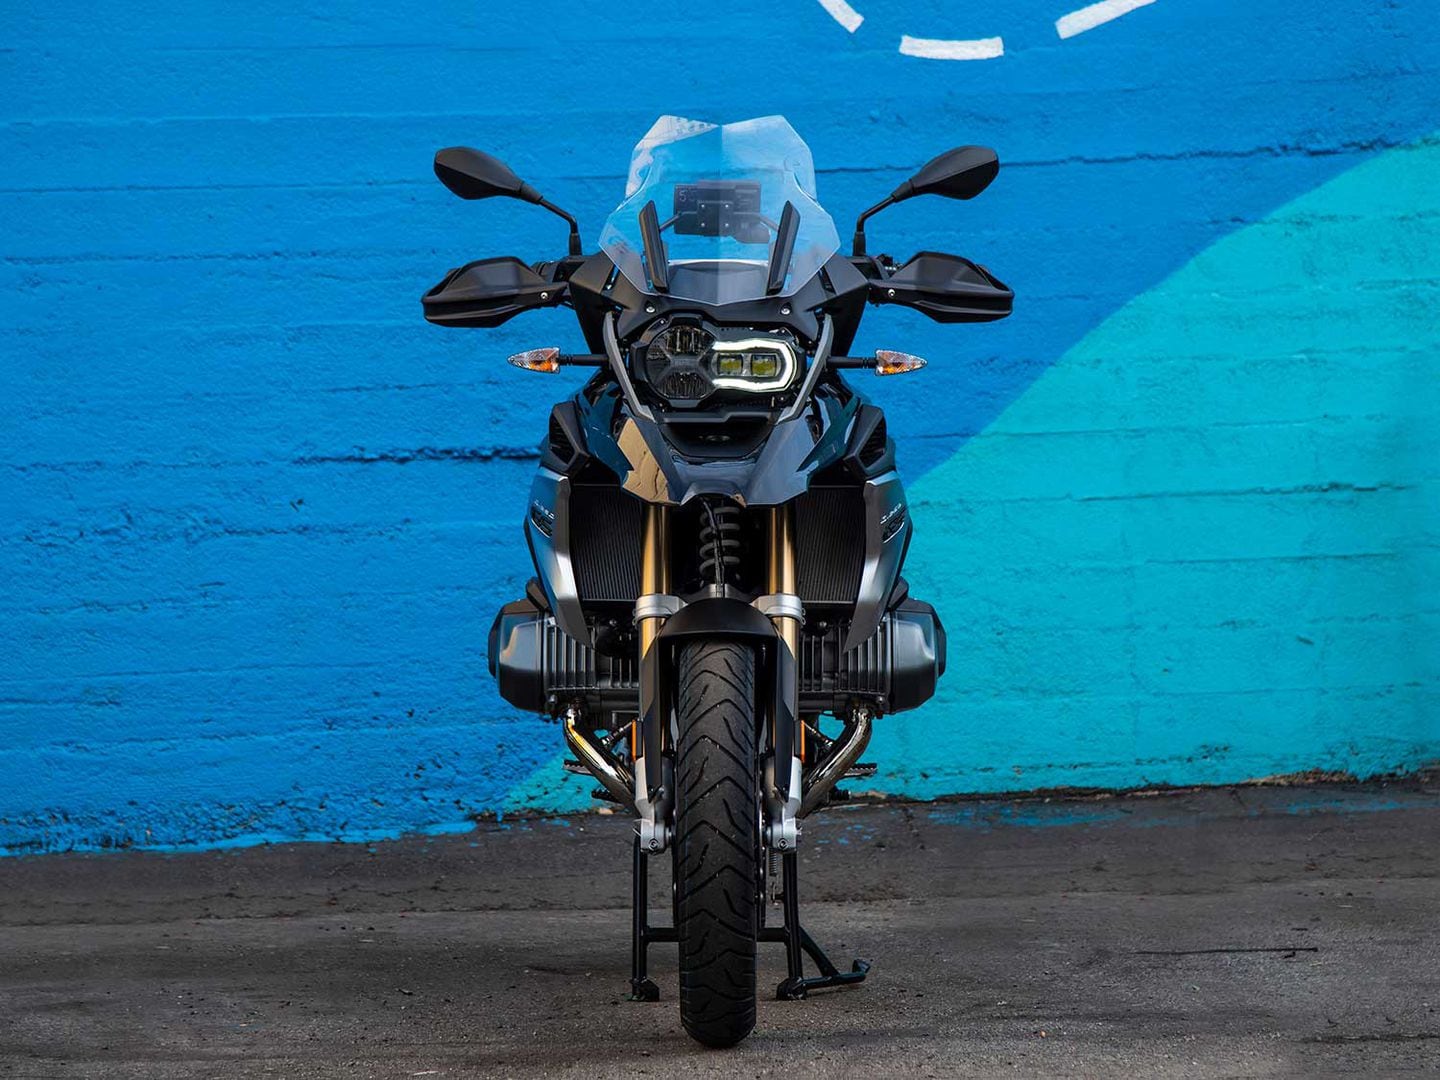 2020 BMW R 1250 GS Urban And City Review